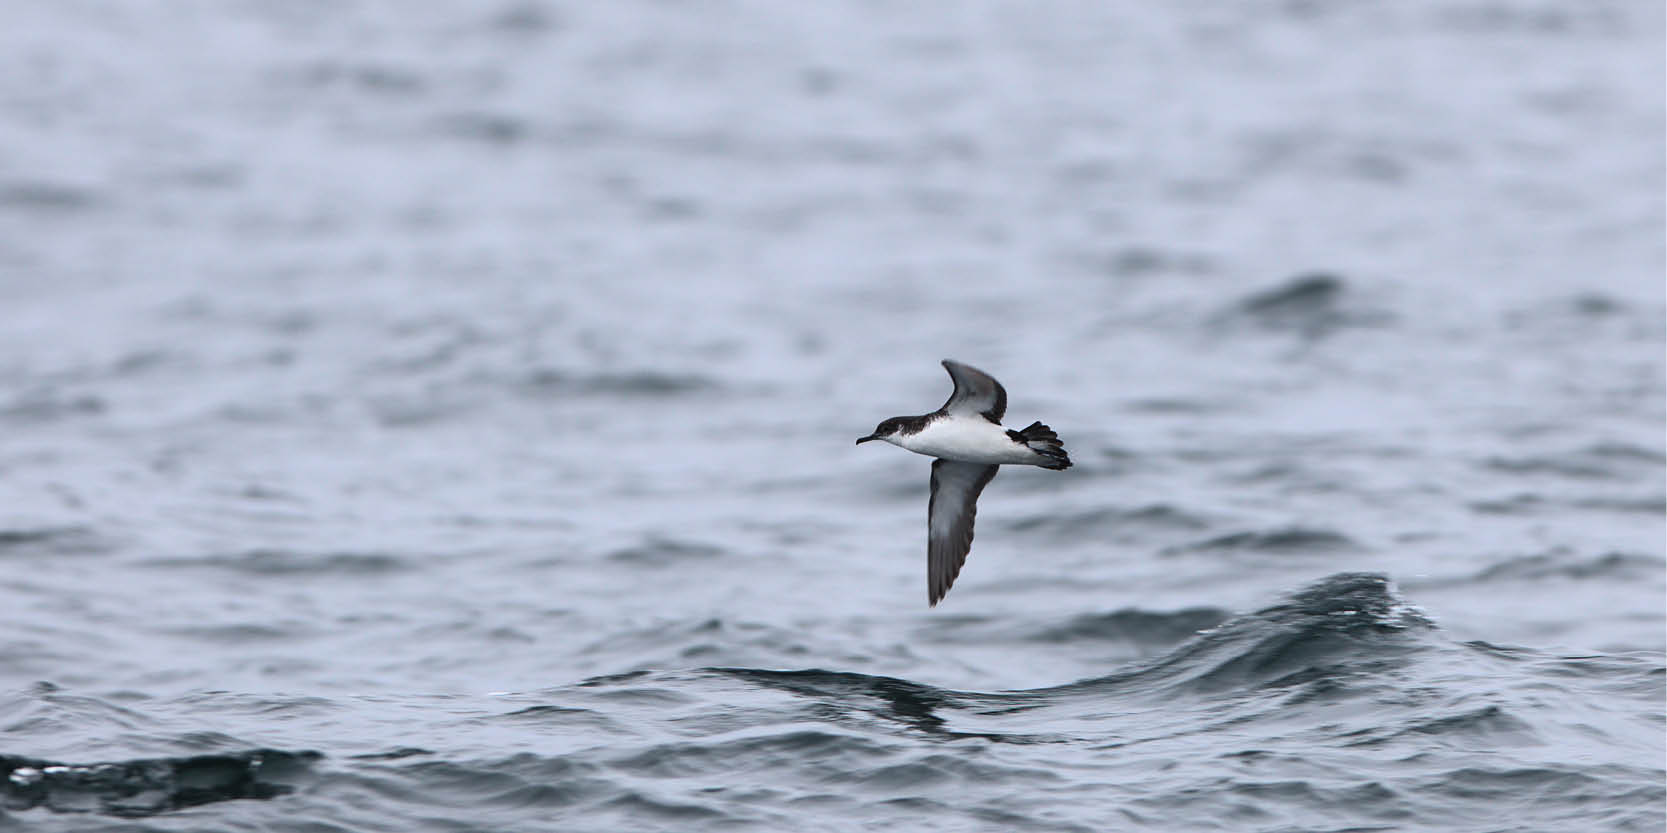 Study reveals that just a tiny amount of oil damages seabirds’ feathers